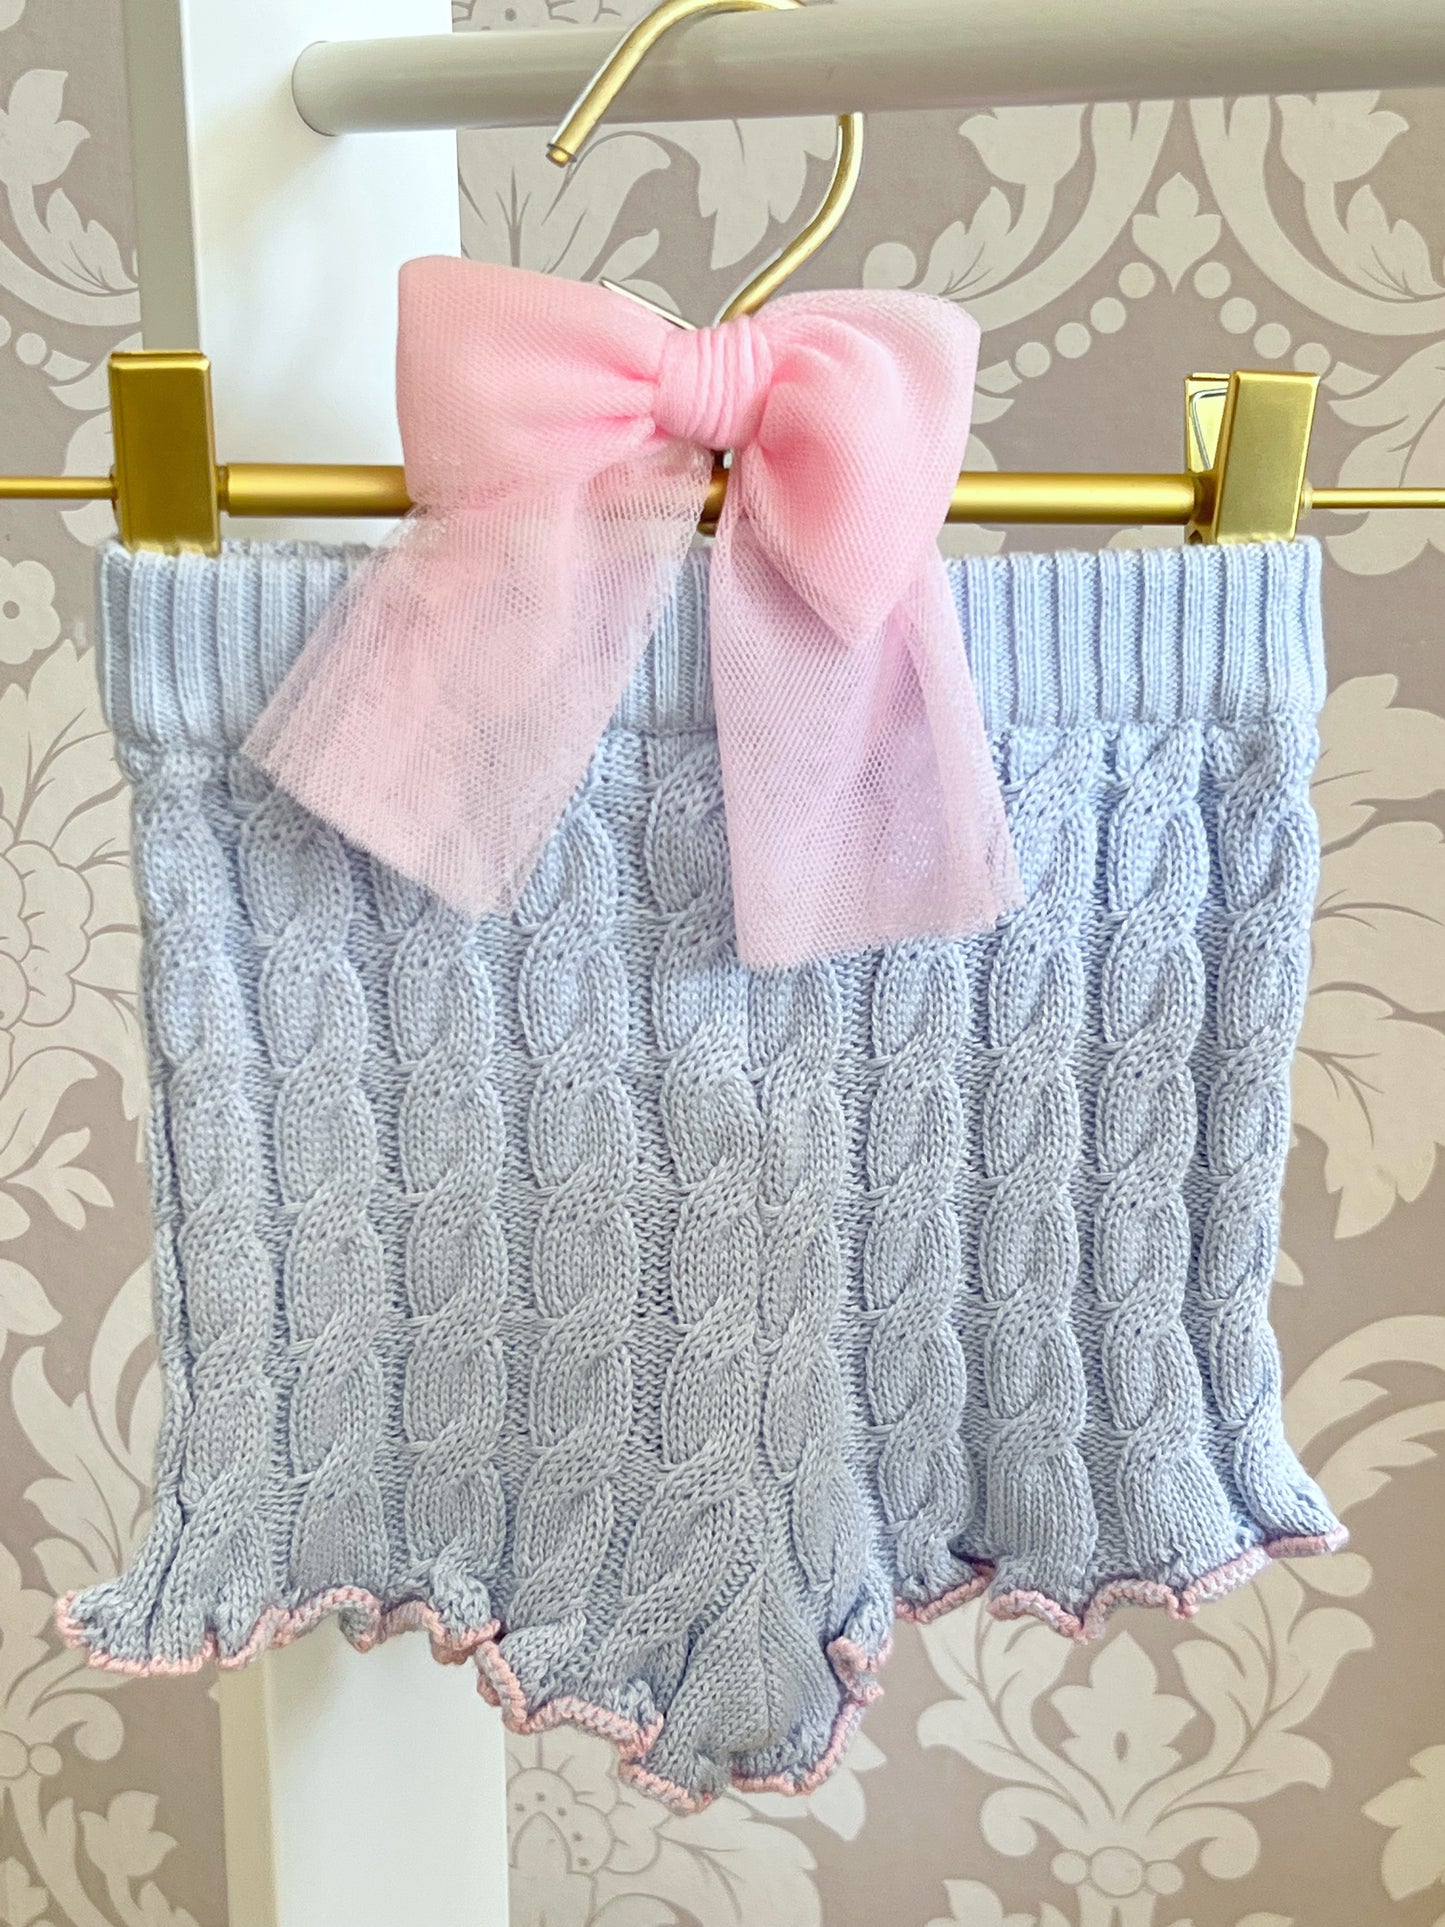 24193 Baby Blue & baby pink 2 piece shorts set